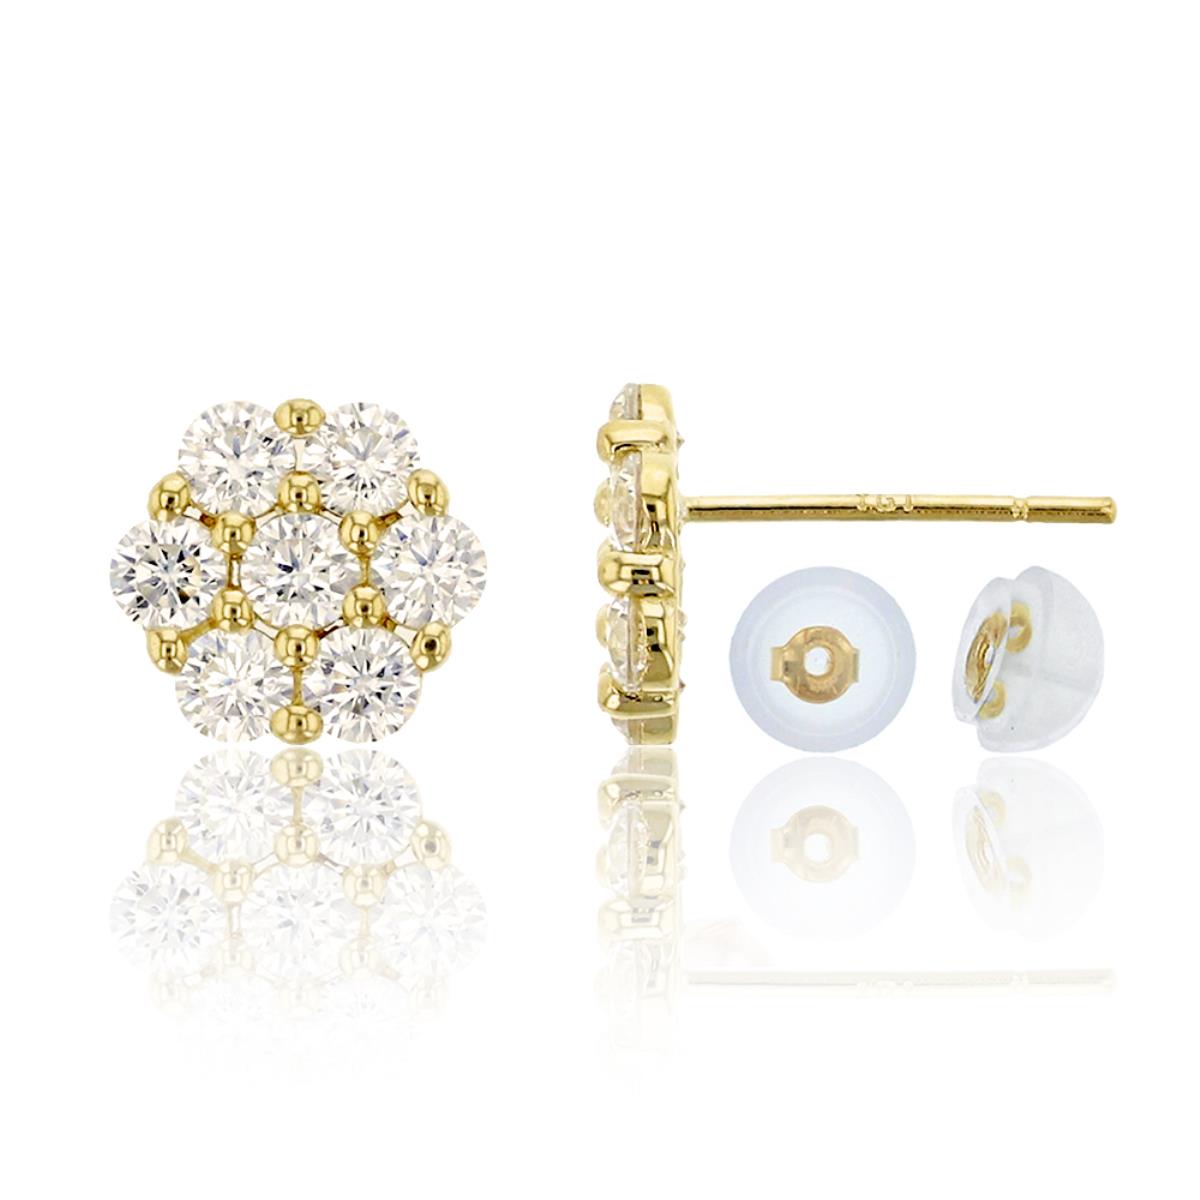 14K Yellow Gold Pave 8mm Cluster CZ Stud Earring & 14K Silicone Back